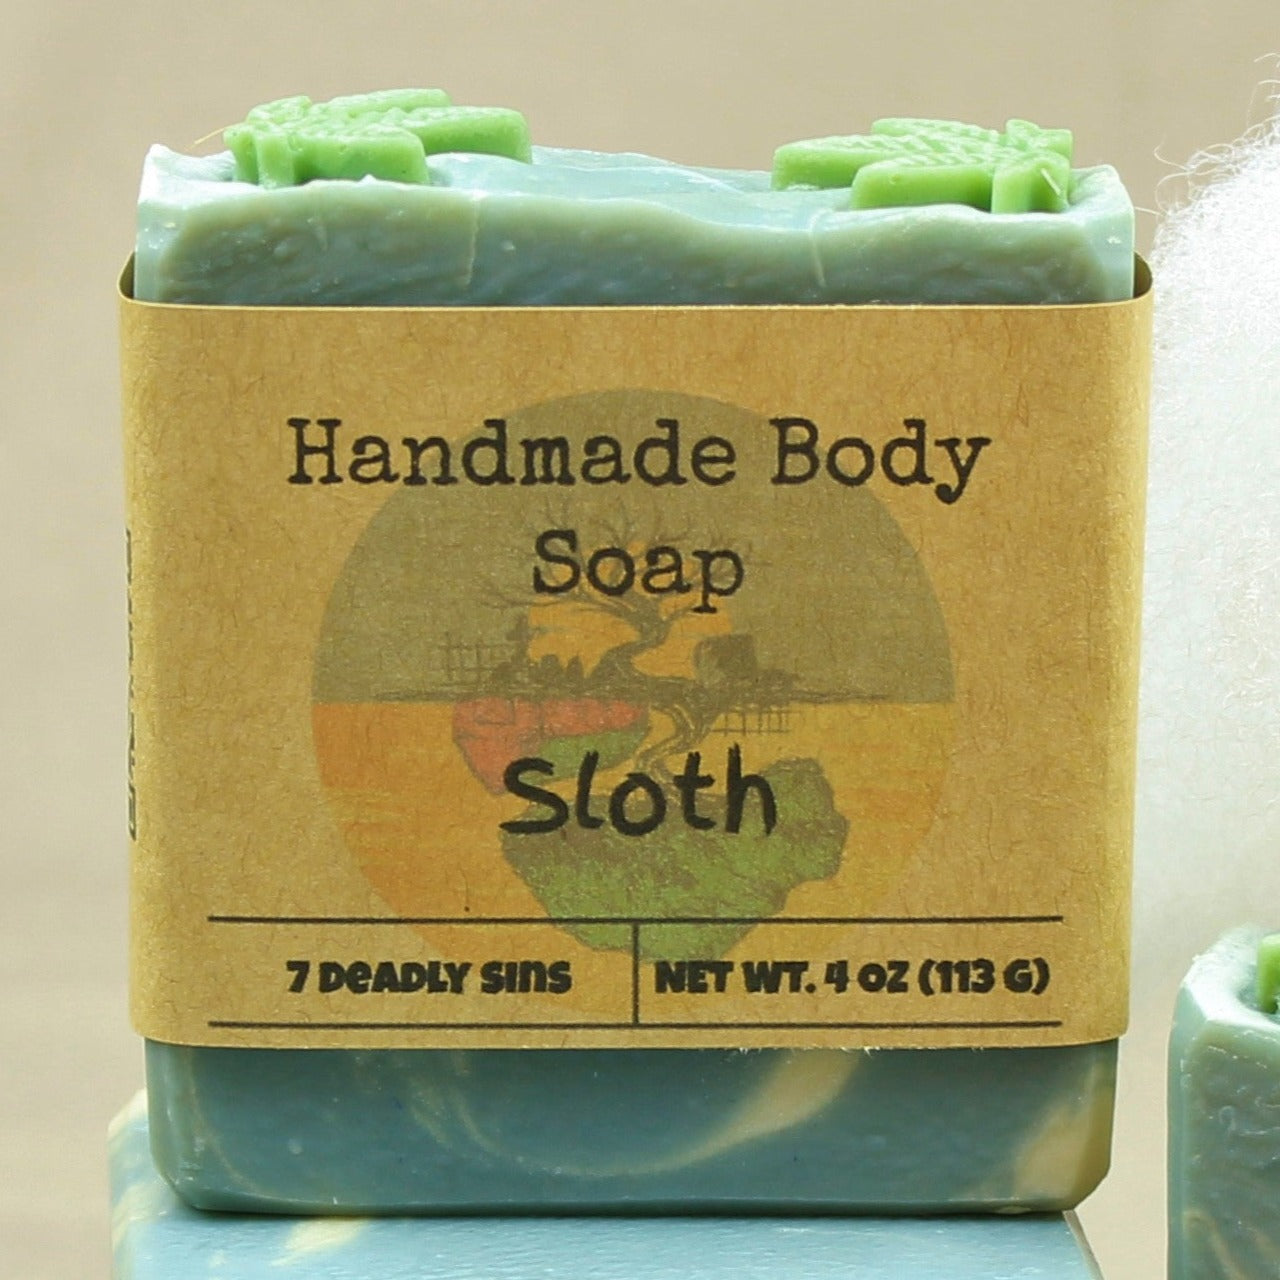 Pictured handmade body soap bar, Sloth.  Shown with label.  Soap is sky blue and white, with green cannabis leaf shaped soap on top, and scented in cannabis flower. 